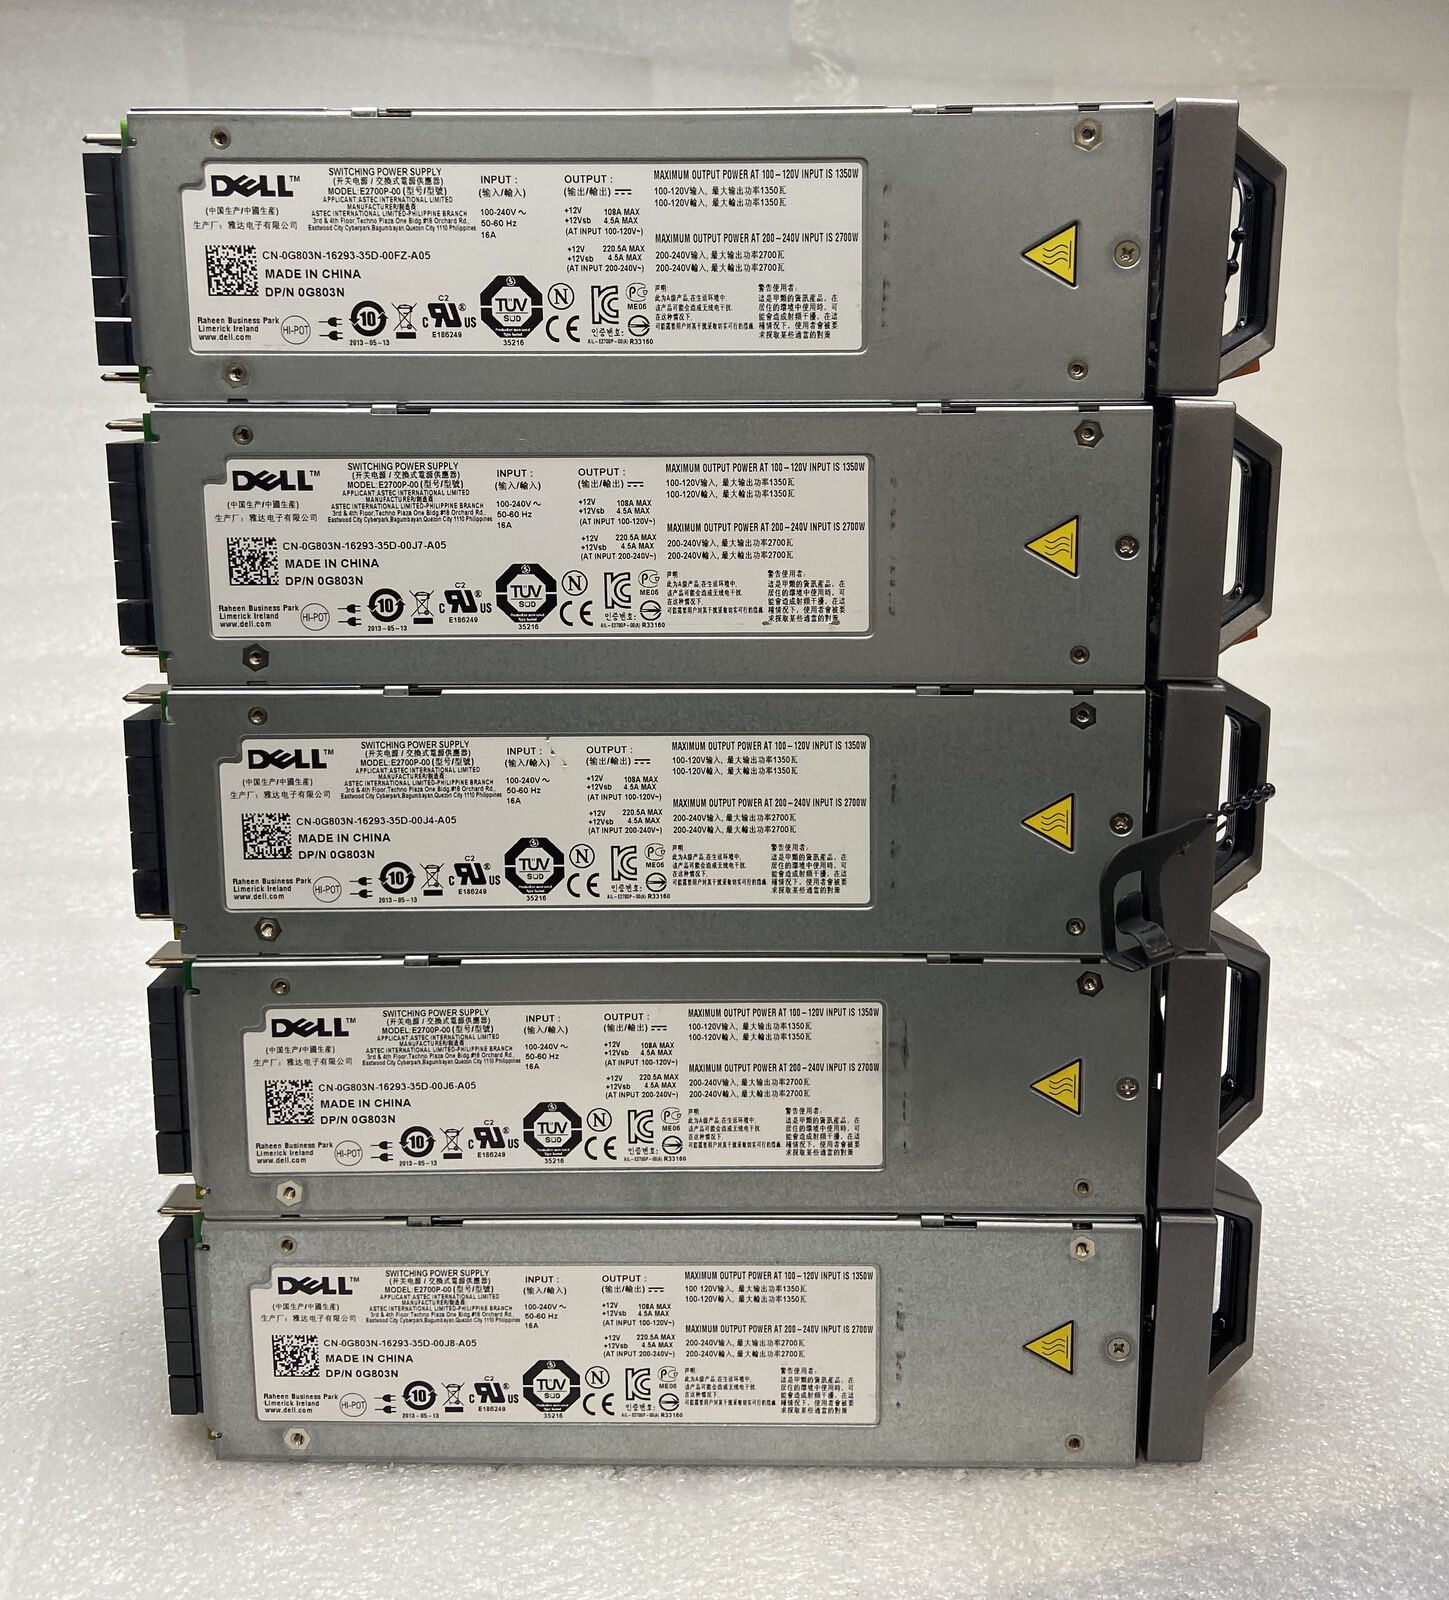 LOT OF 5 DELL PowerEdge M1000E 2700W E2700P-00 Switching Power Supply 0G803N